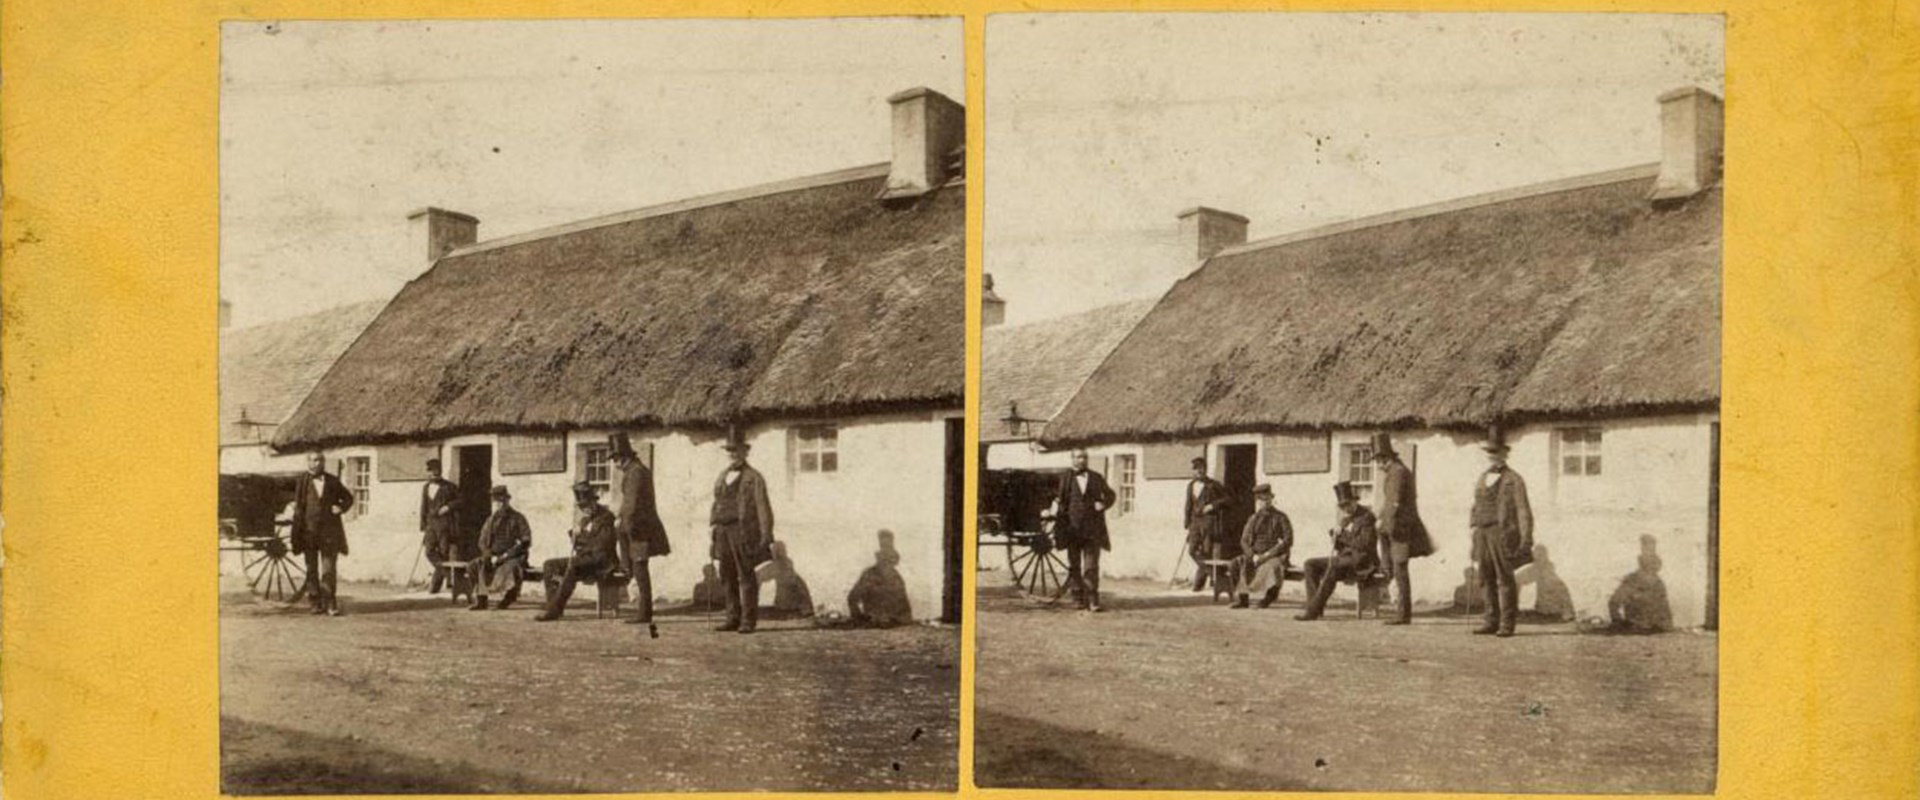 Yellow stereocard with two identical images of people standing in front of a single-storey thatched house.